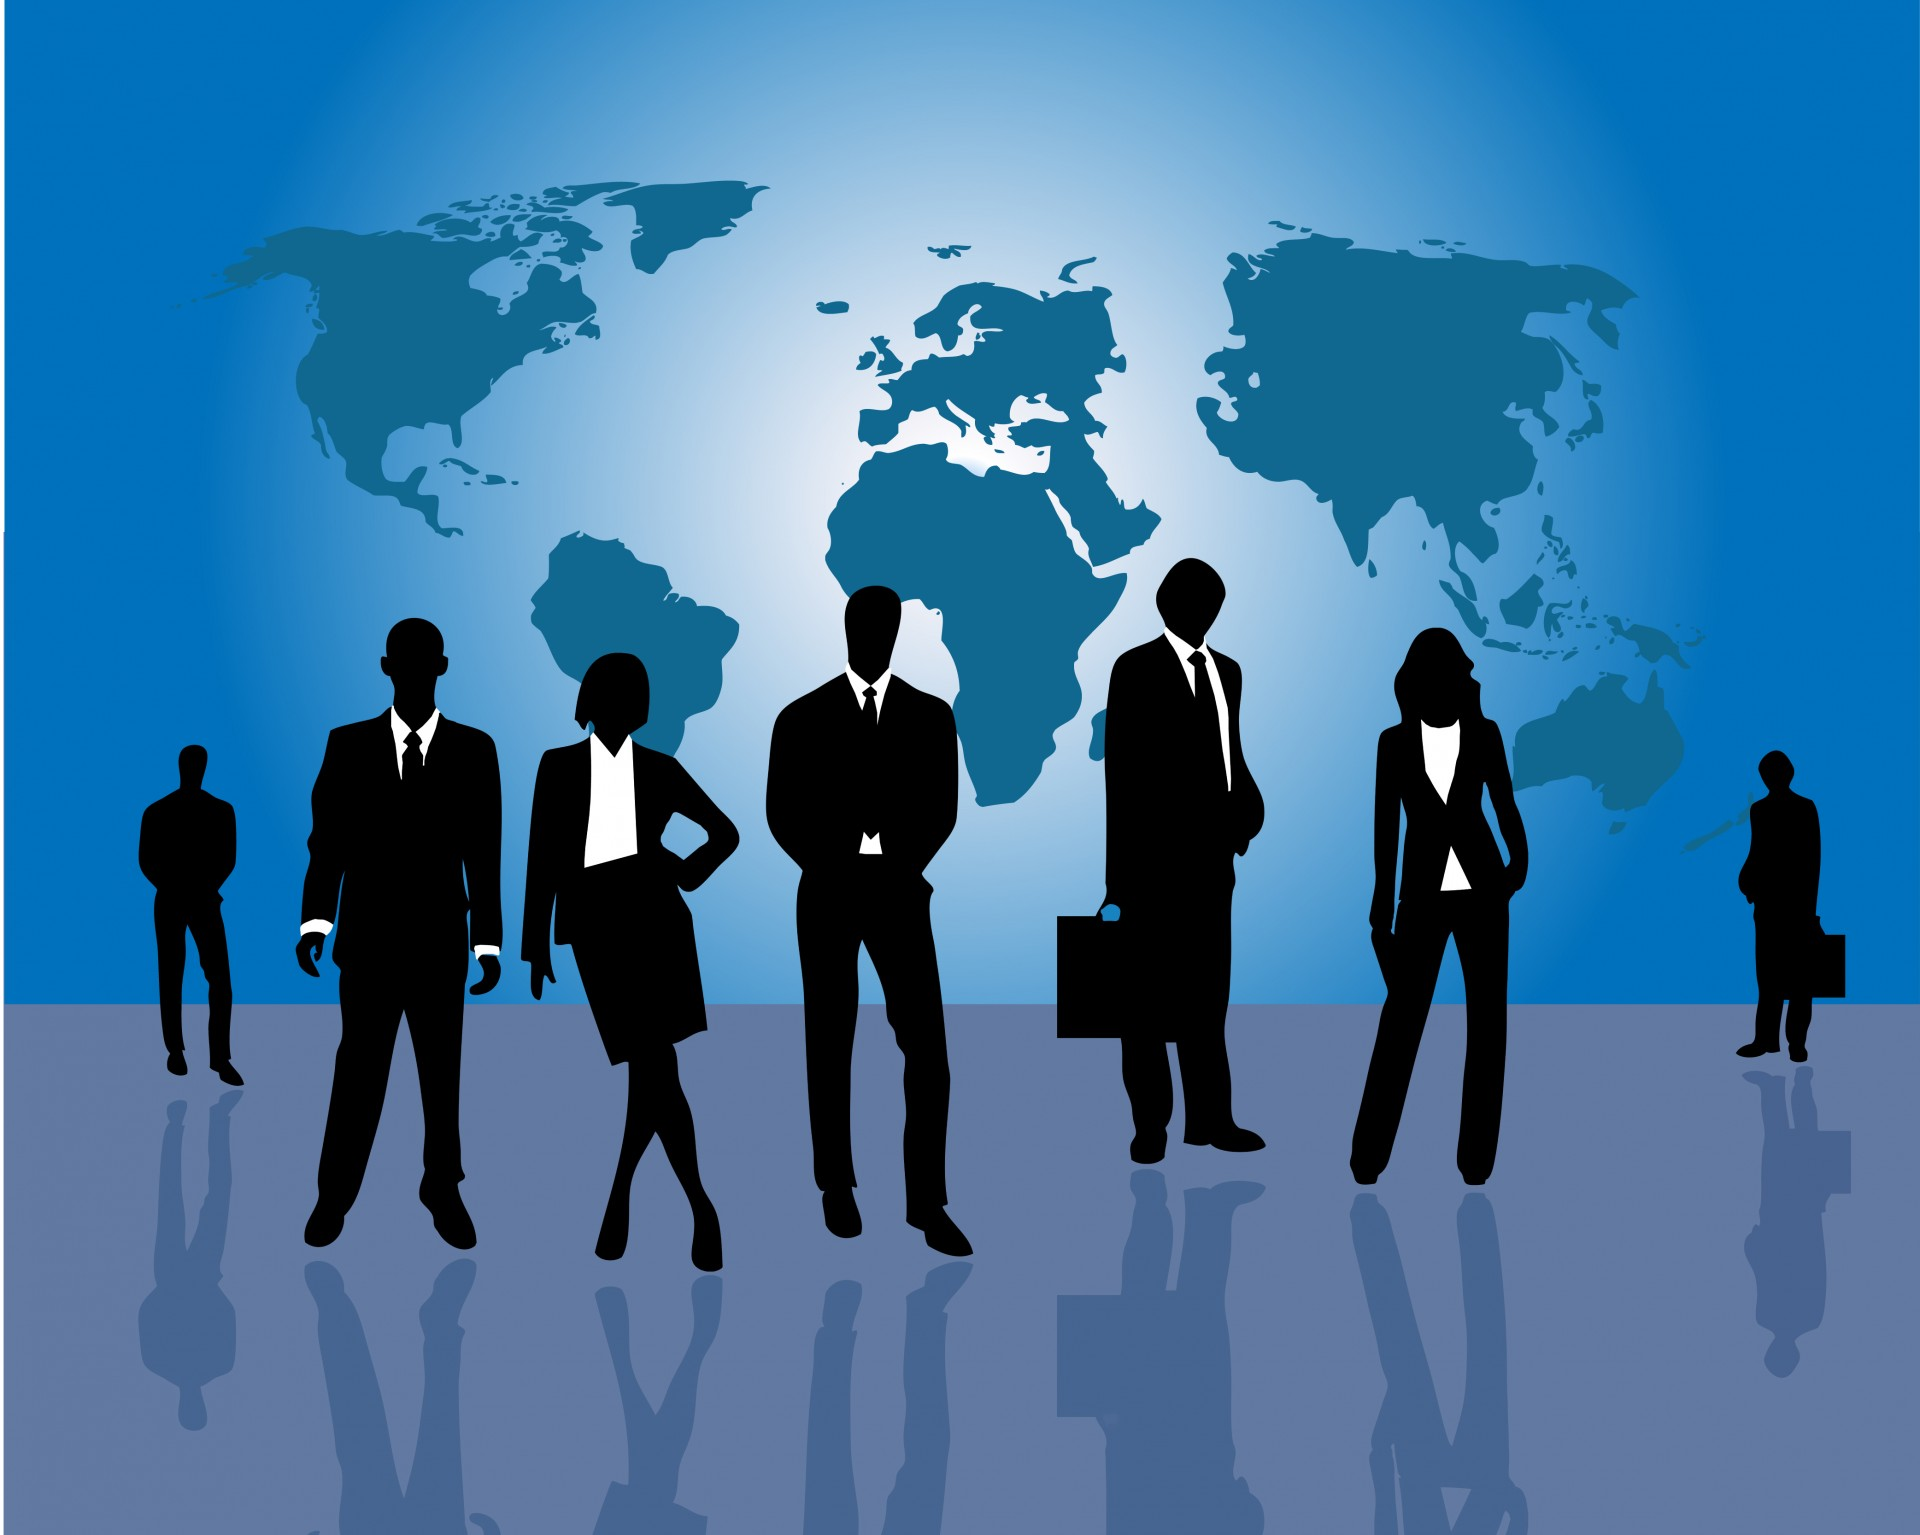 silhouettes of men and women in business attire on a world map background